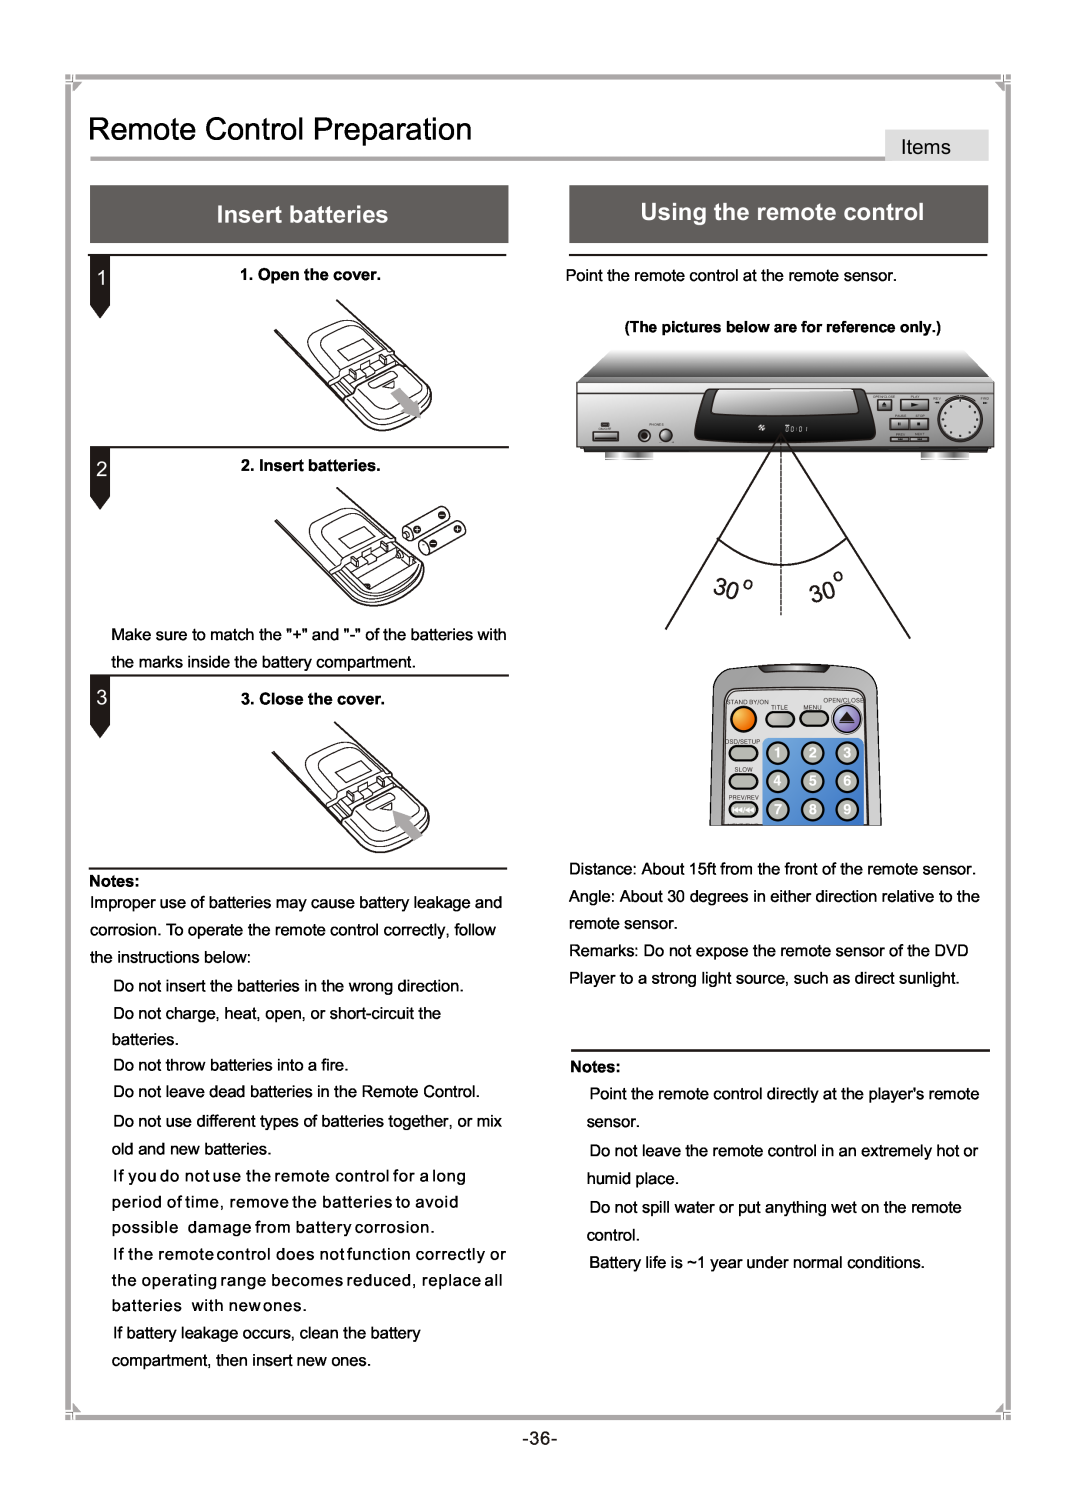 GoVideo DVP745 user manual Remote Control Preparation, Insert batteries, Using the remote control, Items, Open the cover 